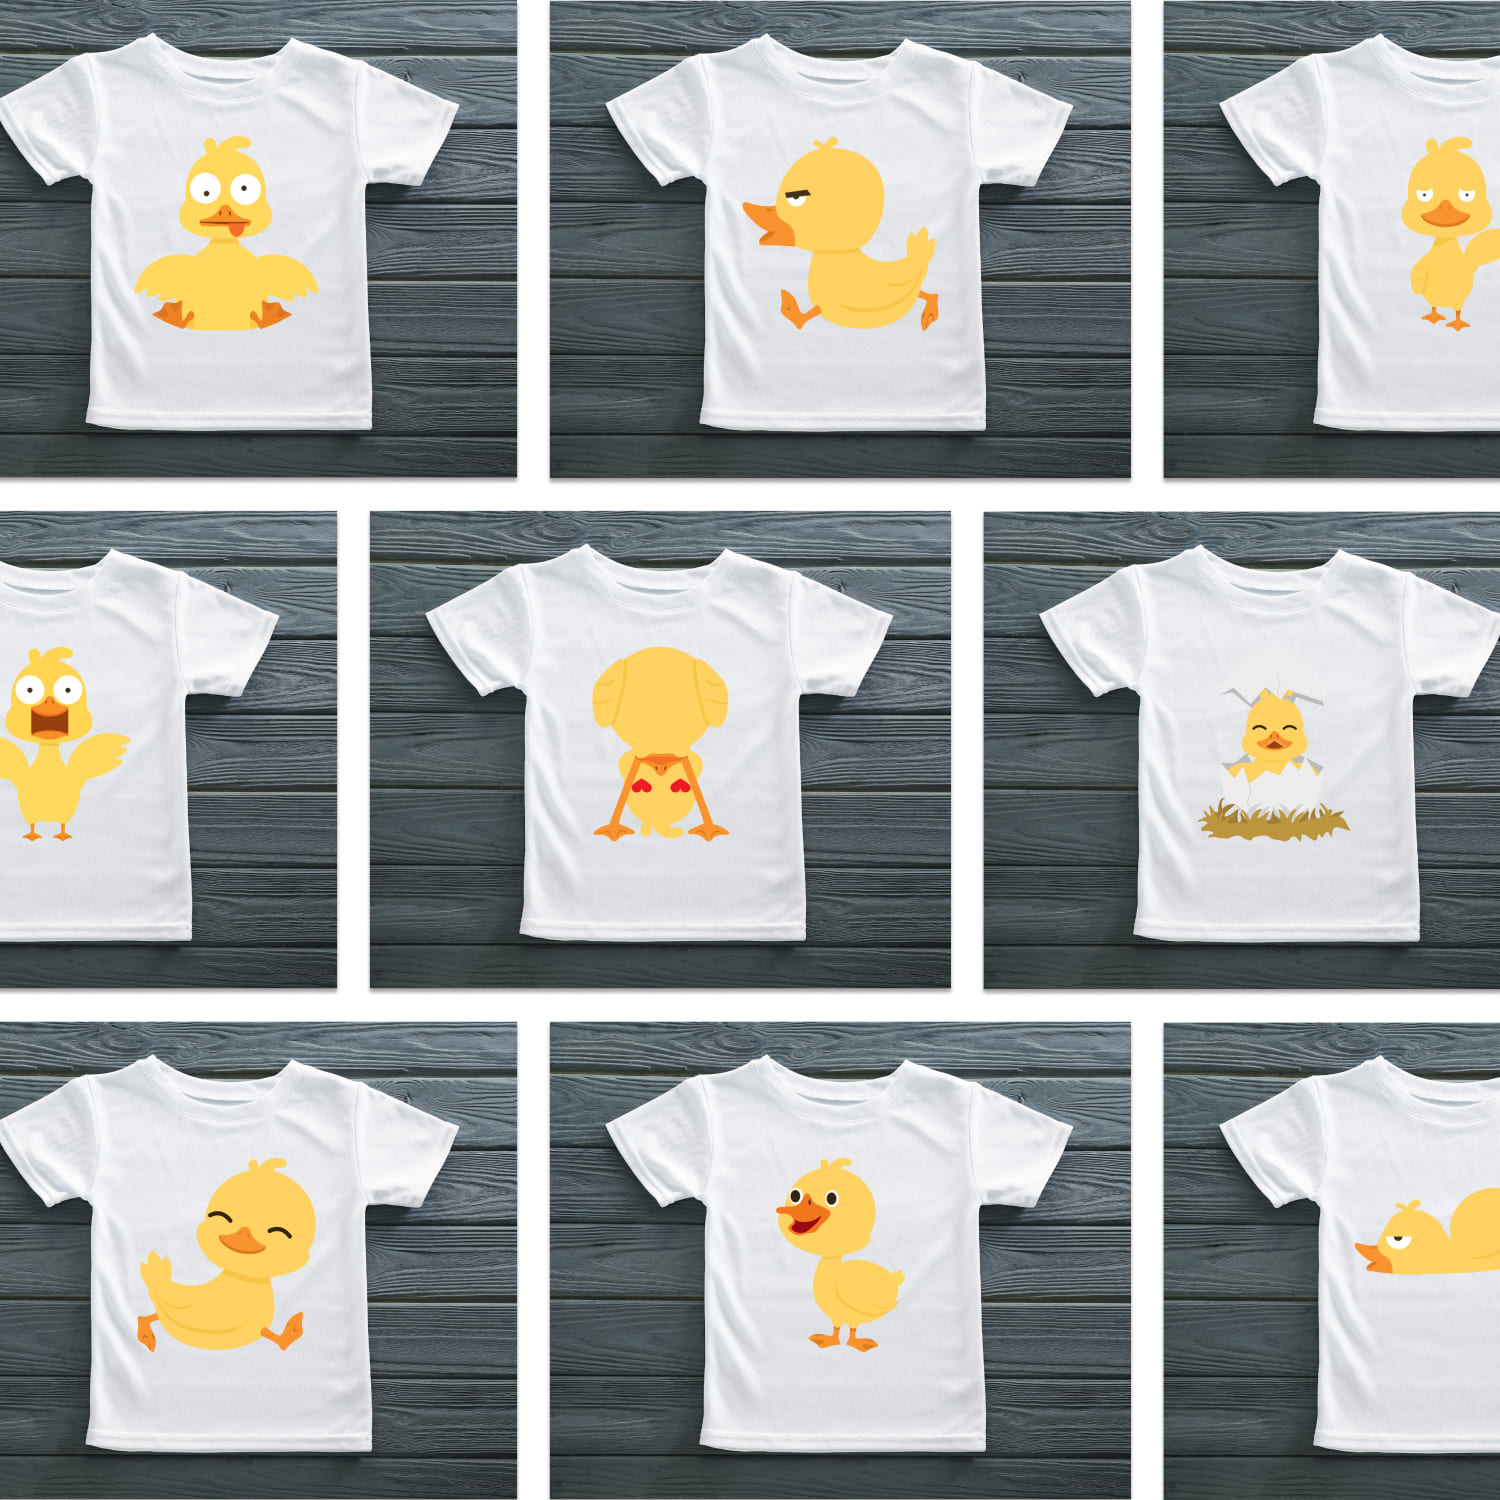 Bundle of images of t-shirts with adorable prints cute duck.